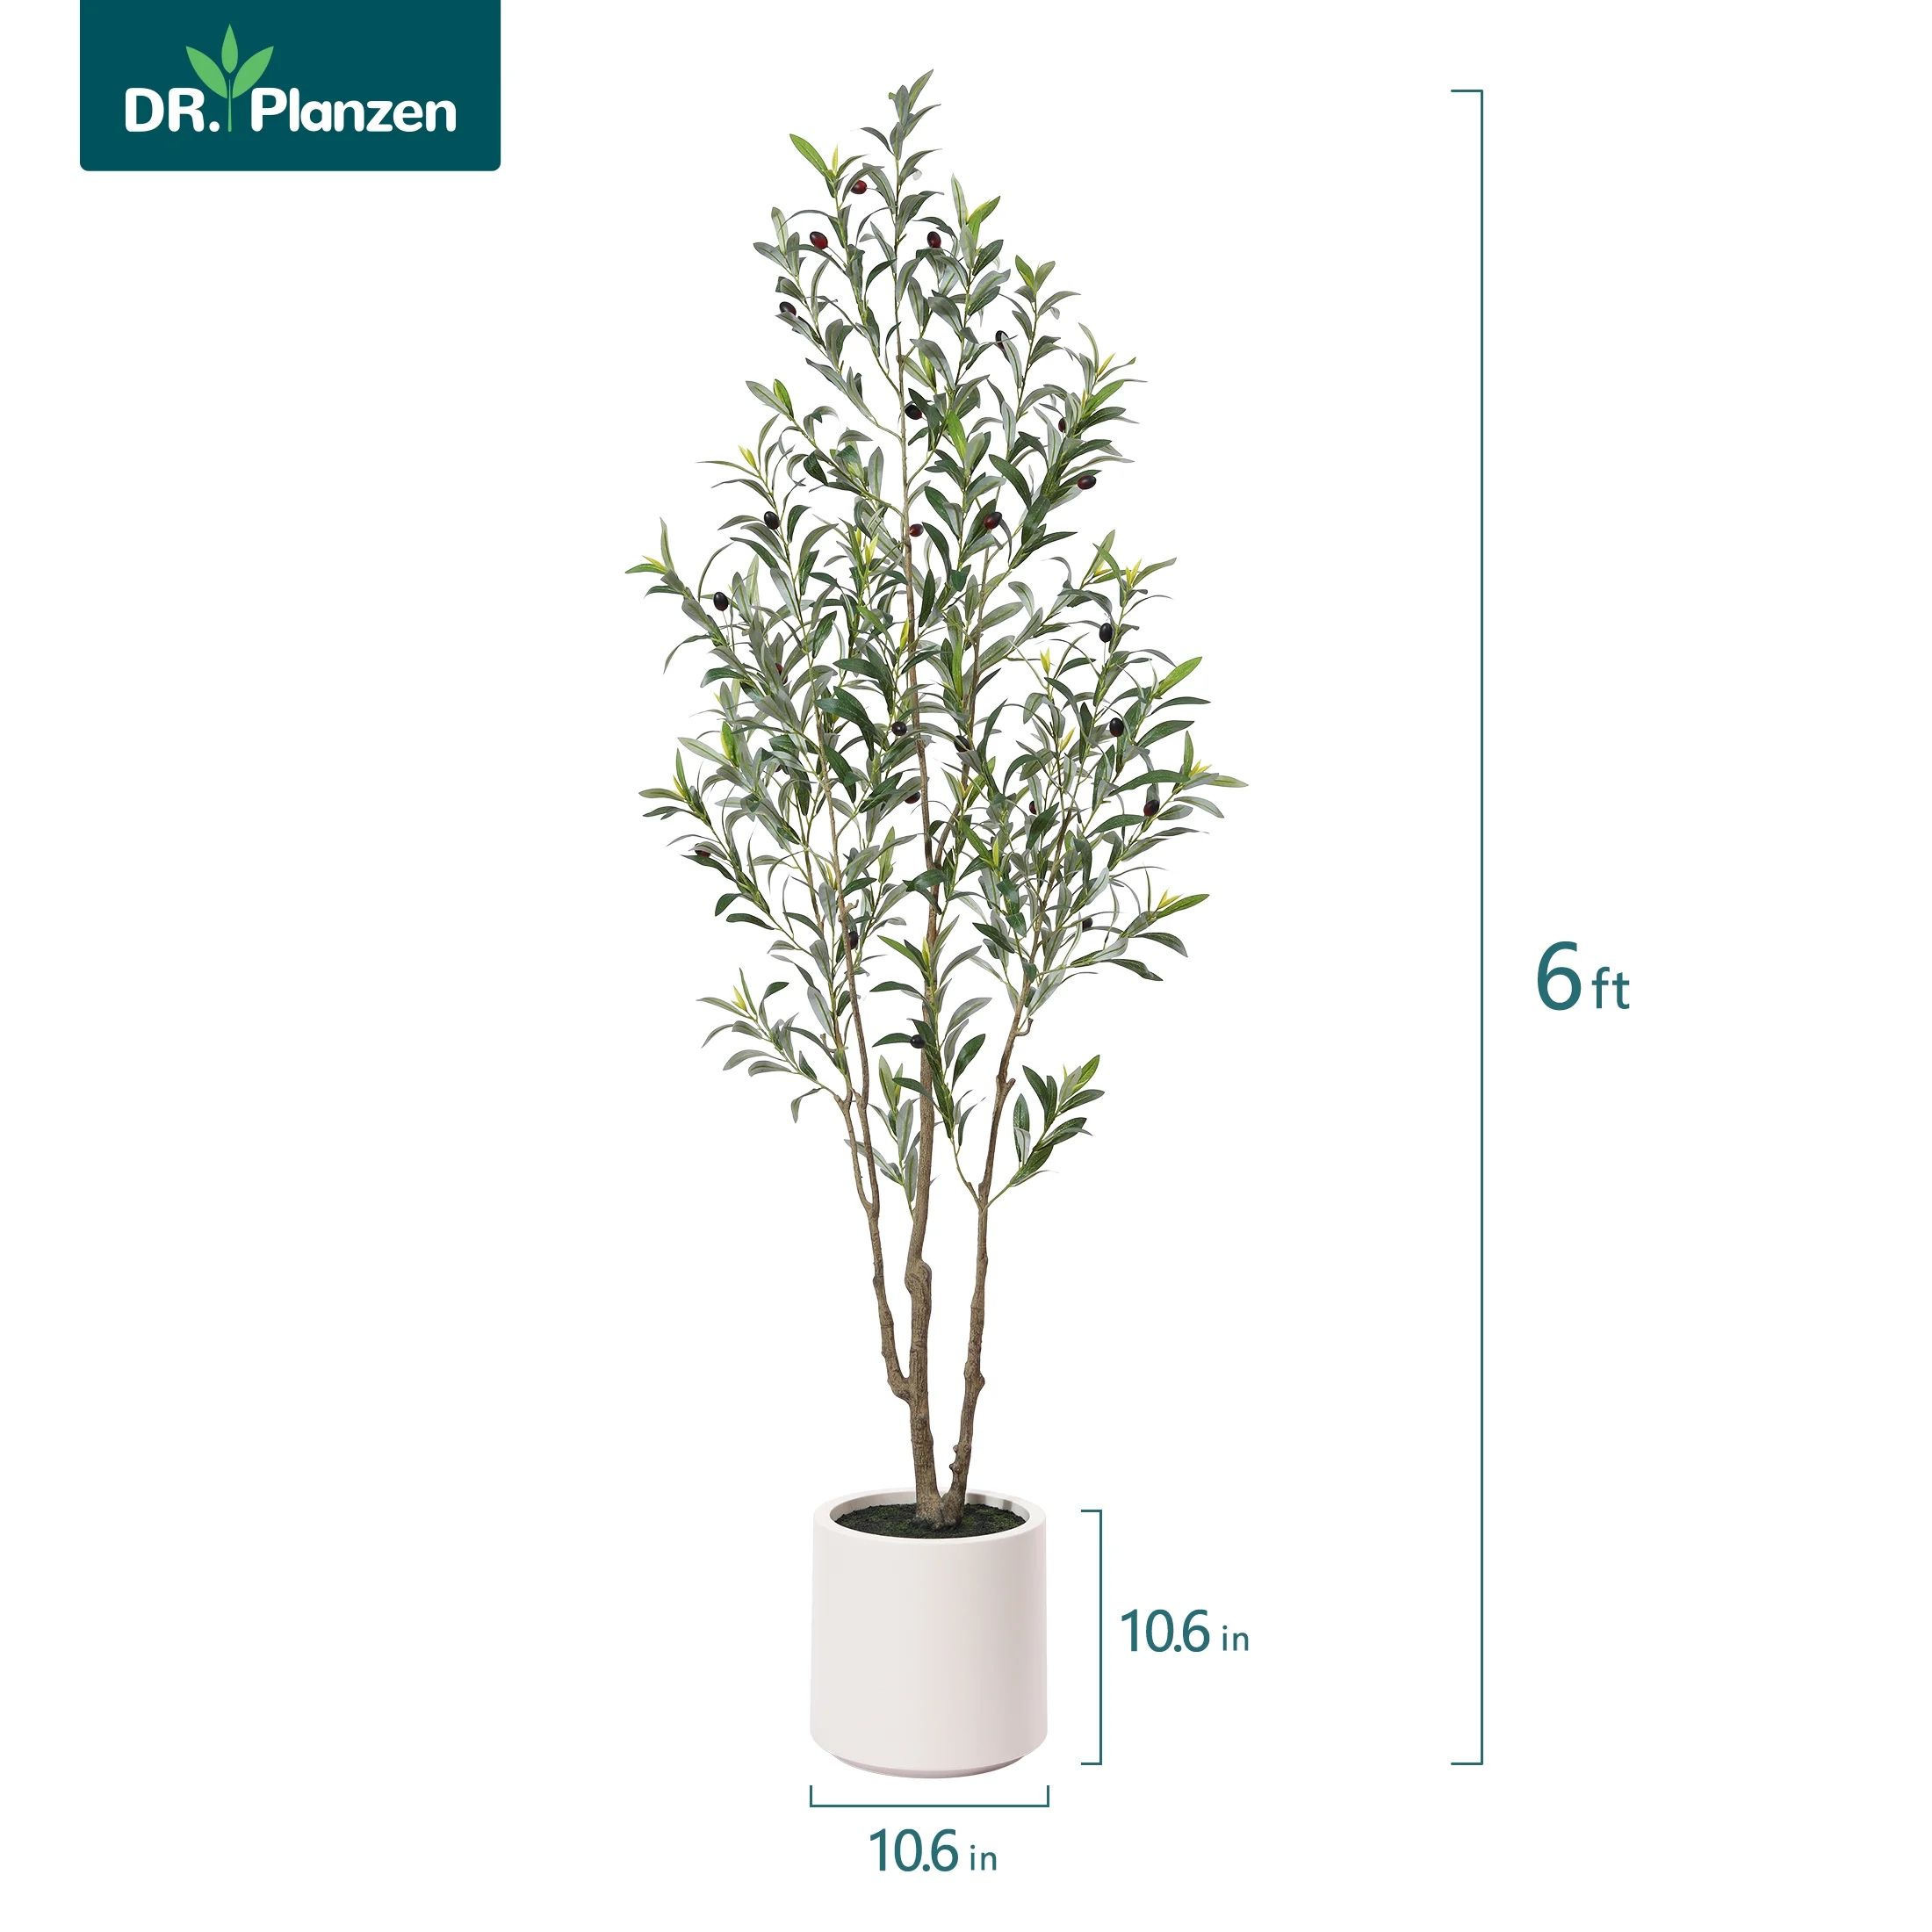 6FT Artificial Muti-Trunk Olive Tree Plants with 10.6 inches Large White Planter. 10 lb. DR.Planz... | Walmart (US)